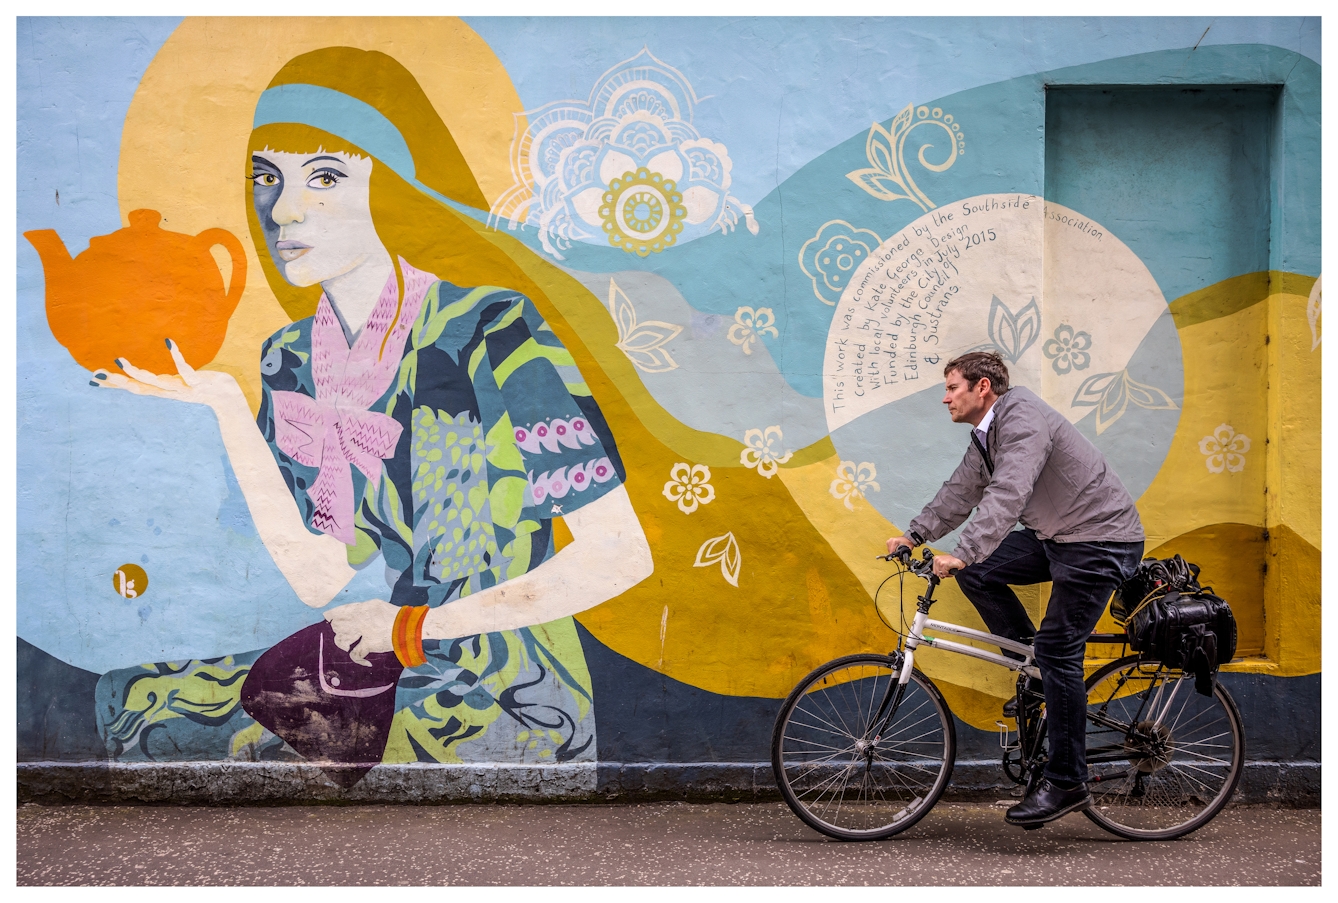 Photograph of a doctor on a bicycle cycling past a large painted colourful mural showing a woman with flowing hair holding an orange teapot. He has is large medical bag strapped to his bike rack.